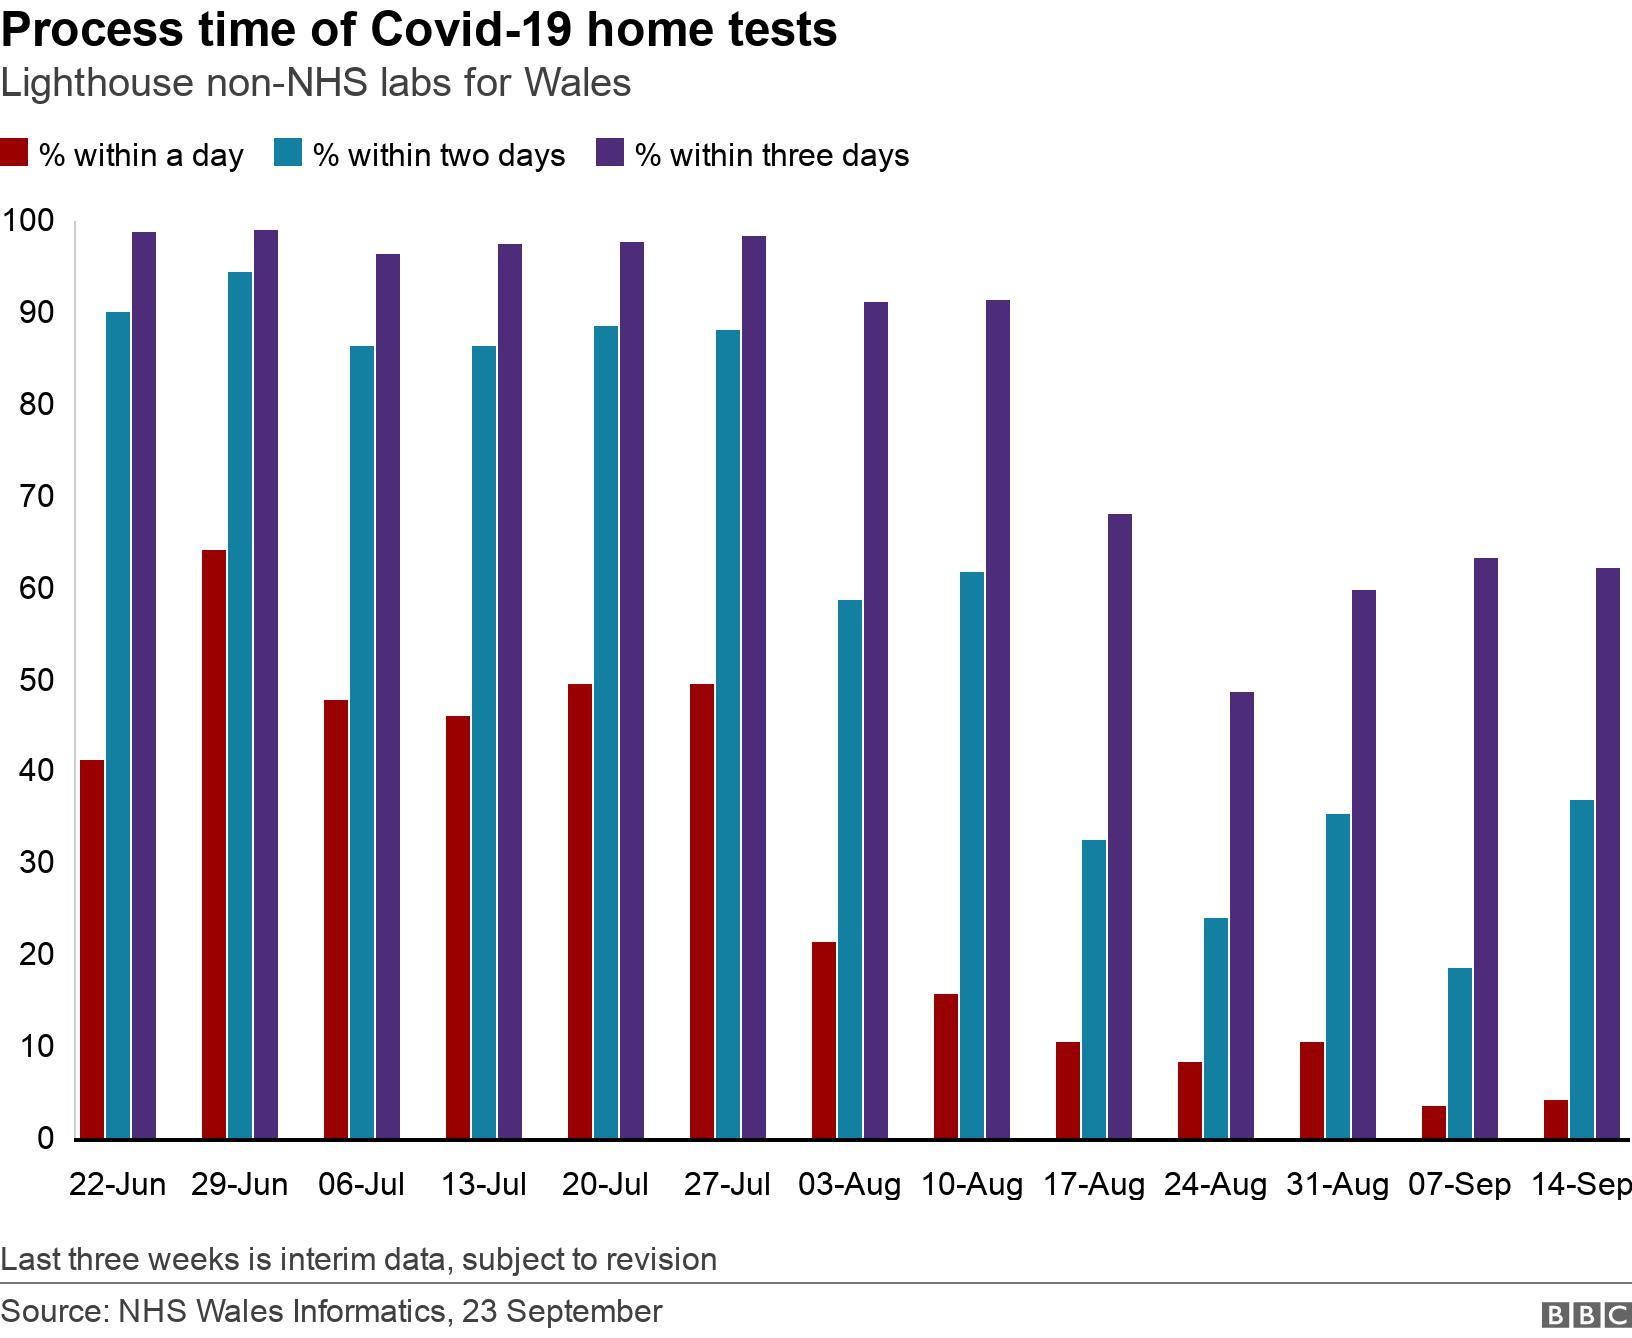 Process time of Covid-19 home tests. Lighthouse non-NHS labs for Wales.  Last three weeks is interim data, subject to revision.